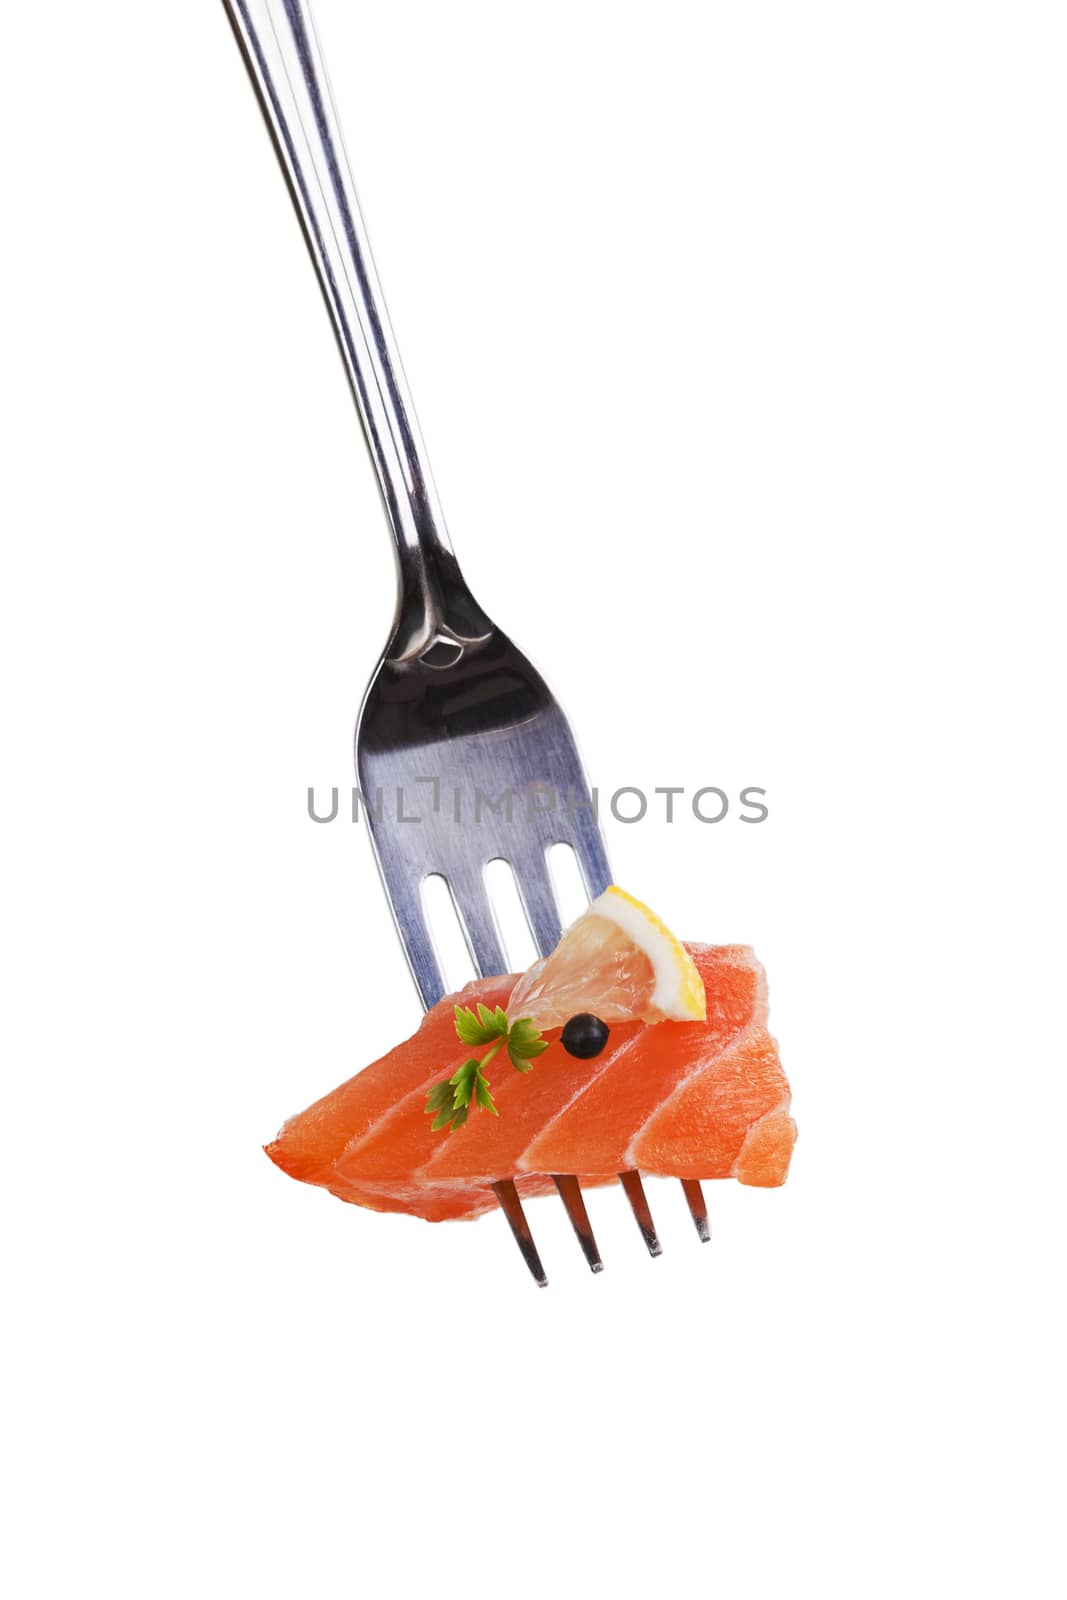 Salmon piece with lemon, pepper corn and herb arranged on fork.